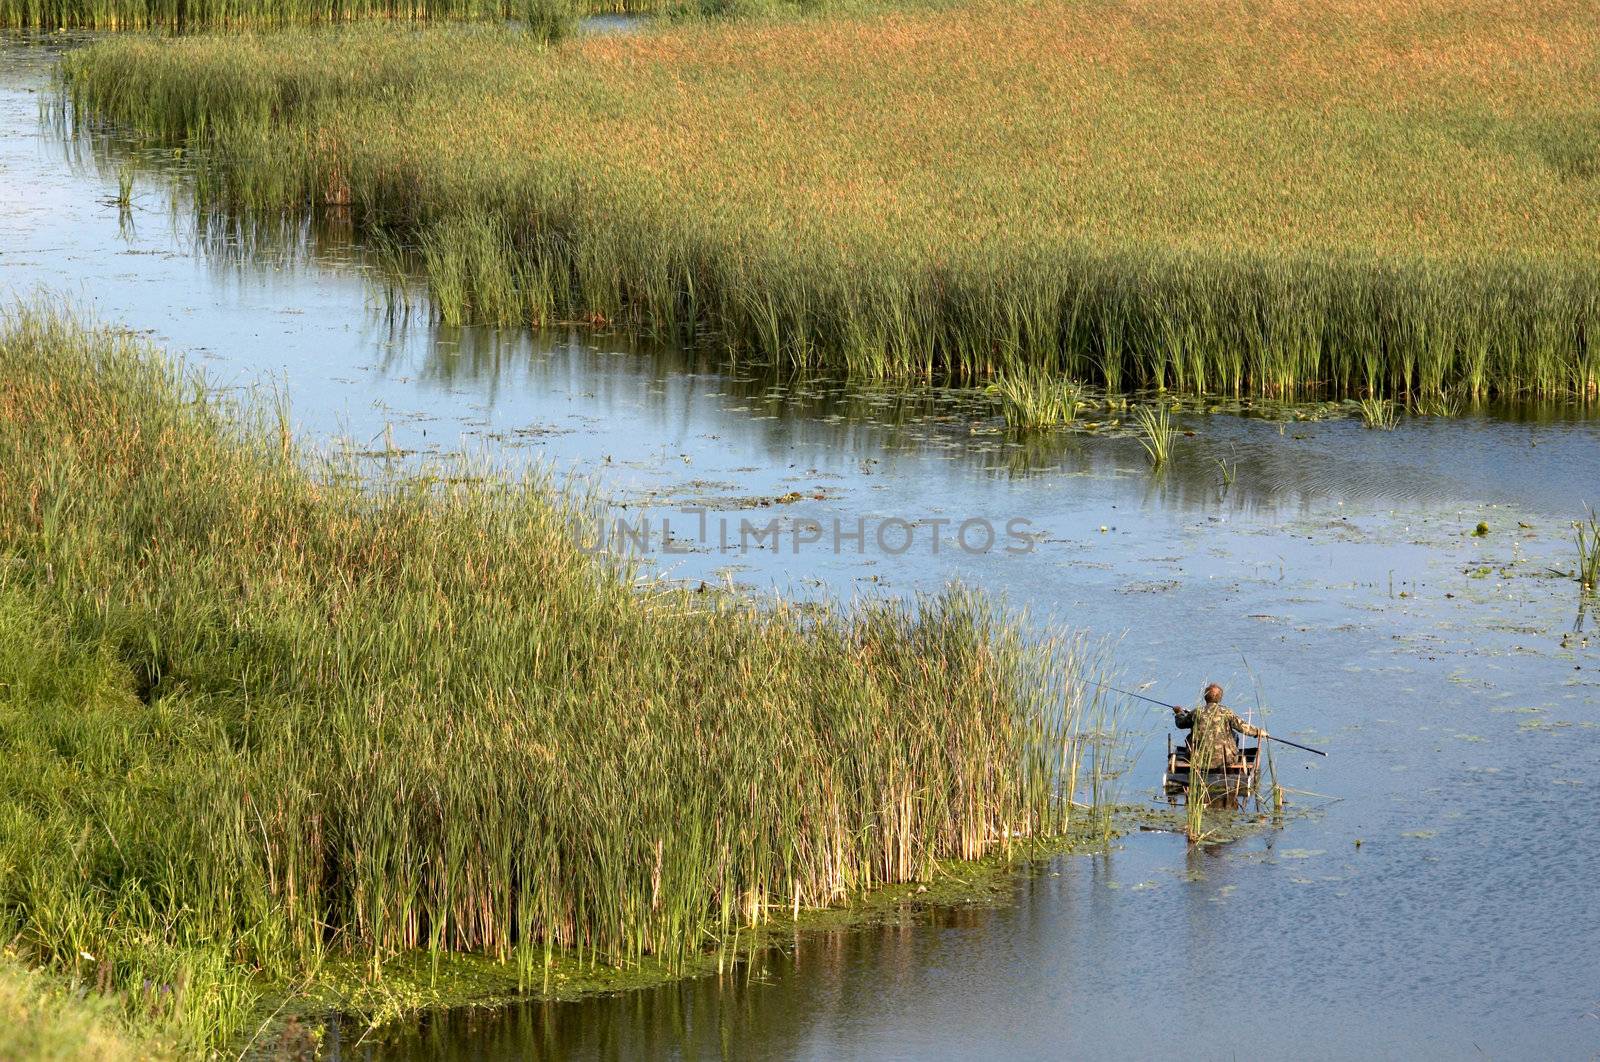 A fisherman in a boat amongst of rush